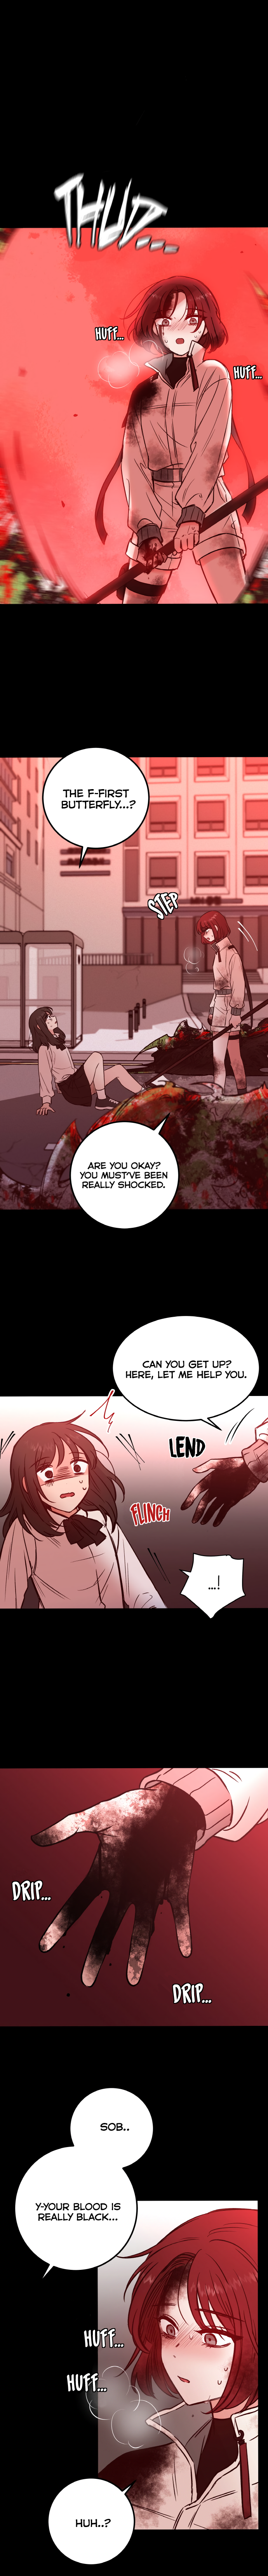 Blood And Butterflies - Page 4